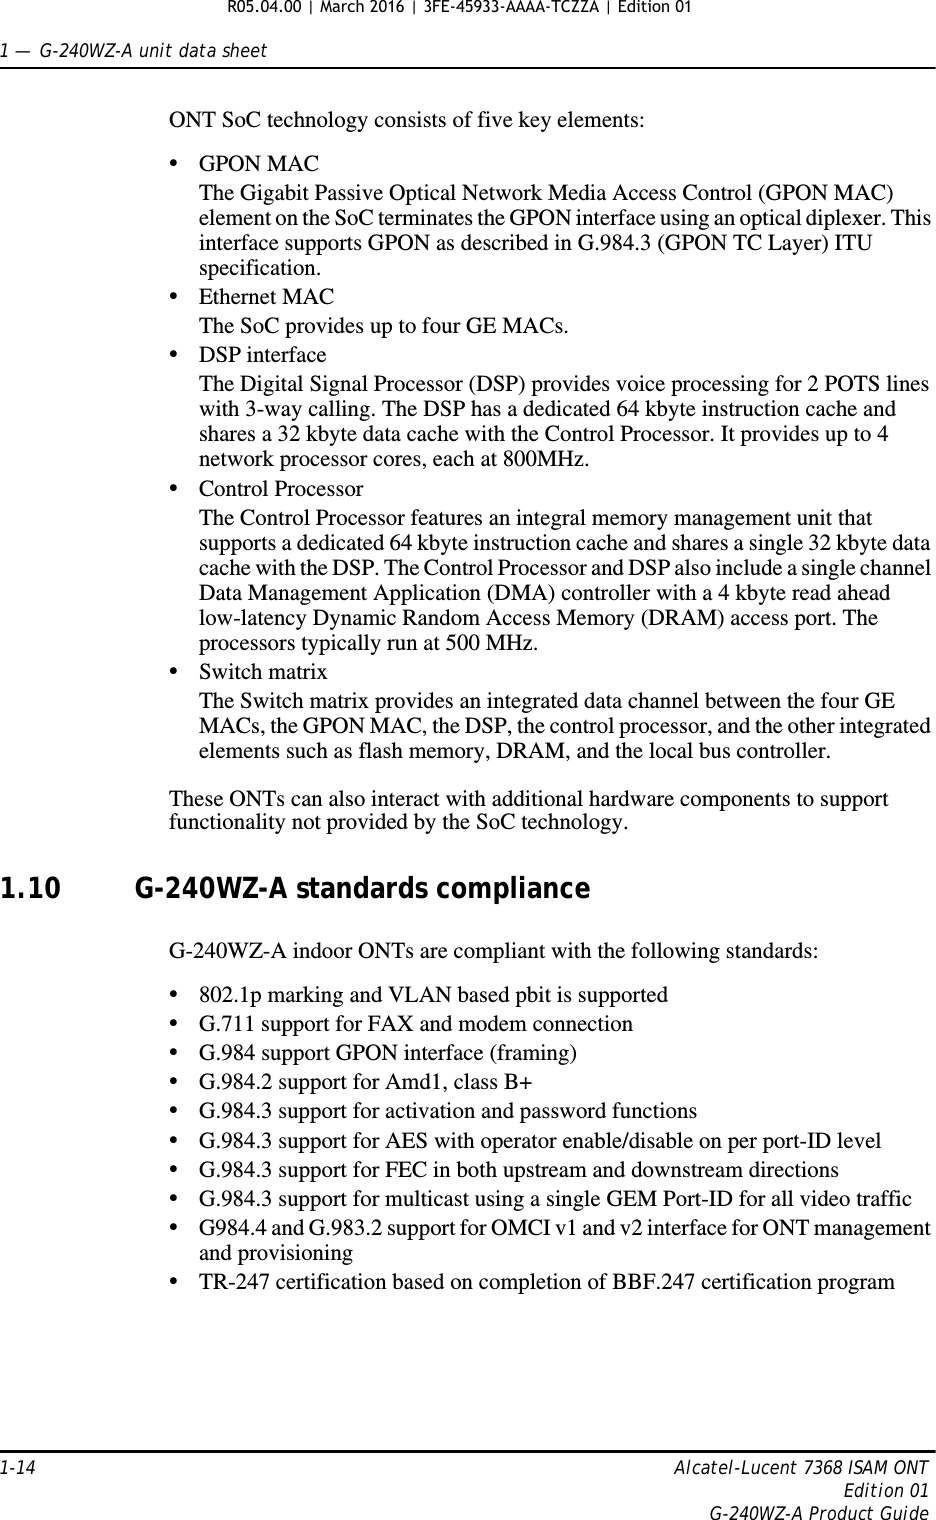 1 —  G-240WZ-A unit data sheet1-14 Alcatel-Lucent 7368 ISAM ONTEdition 01G-240WZ-A Product GuideONT SoC technology consists of five key elements:•GPON MACThe Gigabit Passive Optical Network Media Access Control (GPON MAC) element on the SoC terminates the GPON interface using an optical diplexer. This interface supports GPON as described in G.984.3 (GPON TC Layer) ITU specification. •Ethernet MACThe SoC provides up to four GE MACs.•DSP interfaceThe Digital Signal Processor (DSP) provides voice processing for 2 POTS lines with 3-way calling. The DSP has a dedicated 64 kbyte instruction cache and shares a 32 kbyte data cache with the Control Processor. It provides up to 4 network processor cores, each at 800MHz. •Control ProcessorThe Control Processor features an integral memory management unit that supports a dedicated 64 kbyte instruction cache and shares a single 32 kbyte data cache with the DSP. The Control Processor and DSP also include a single channel Data Management Application (DMA) controller with a 4 kbyte read ahead low-latency Dynamic Random Access Memory (DRAM) access port. The processors typically run at 500 MHz. •Switch matrixThe Switch matrix provides an integrated data channel between the four GE MACs, the GPON MAC, the DSP, the control processor, and the other integrated elements such as flash memory, DRAM, and the local bus controller.These ONTs can also interact with additional hardware components to support functionality not provided by the SoC technology.1.10 G-240WZ-A standards complianceG-240WZ-A indoor ONTs are compliant with the following standards:•802.1p marking and VLAN based pbit is supported•G.711 support for FAX and modem connection•G.984 support GPON interface (framing)•G.984.2 support for Amd1, class B+•G.984.3 support for activation and password functions•G.984.3 support for AES with operator enable/disable on per port-ID level•G.984.3 support for FEC in both upstream and downstream directions•G.984.3 support for multicast using a single GEM Port-ID for all video traffic•G984.4 and G.983.2 support for OMCI v1 and v2 interface for ONT management and provisioning•TR-247 certification based on completion of BBF.247 certification programR05.04.00 | March 2016 | 3FE-45933-AAAA-TCZZA | Edition 01 